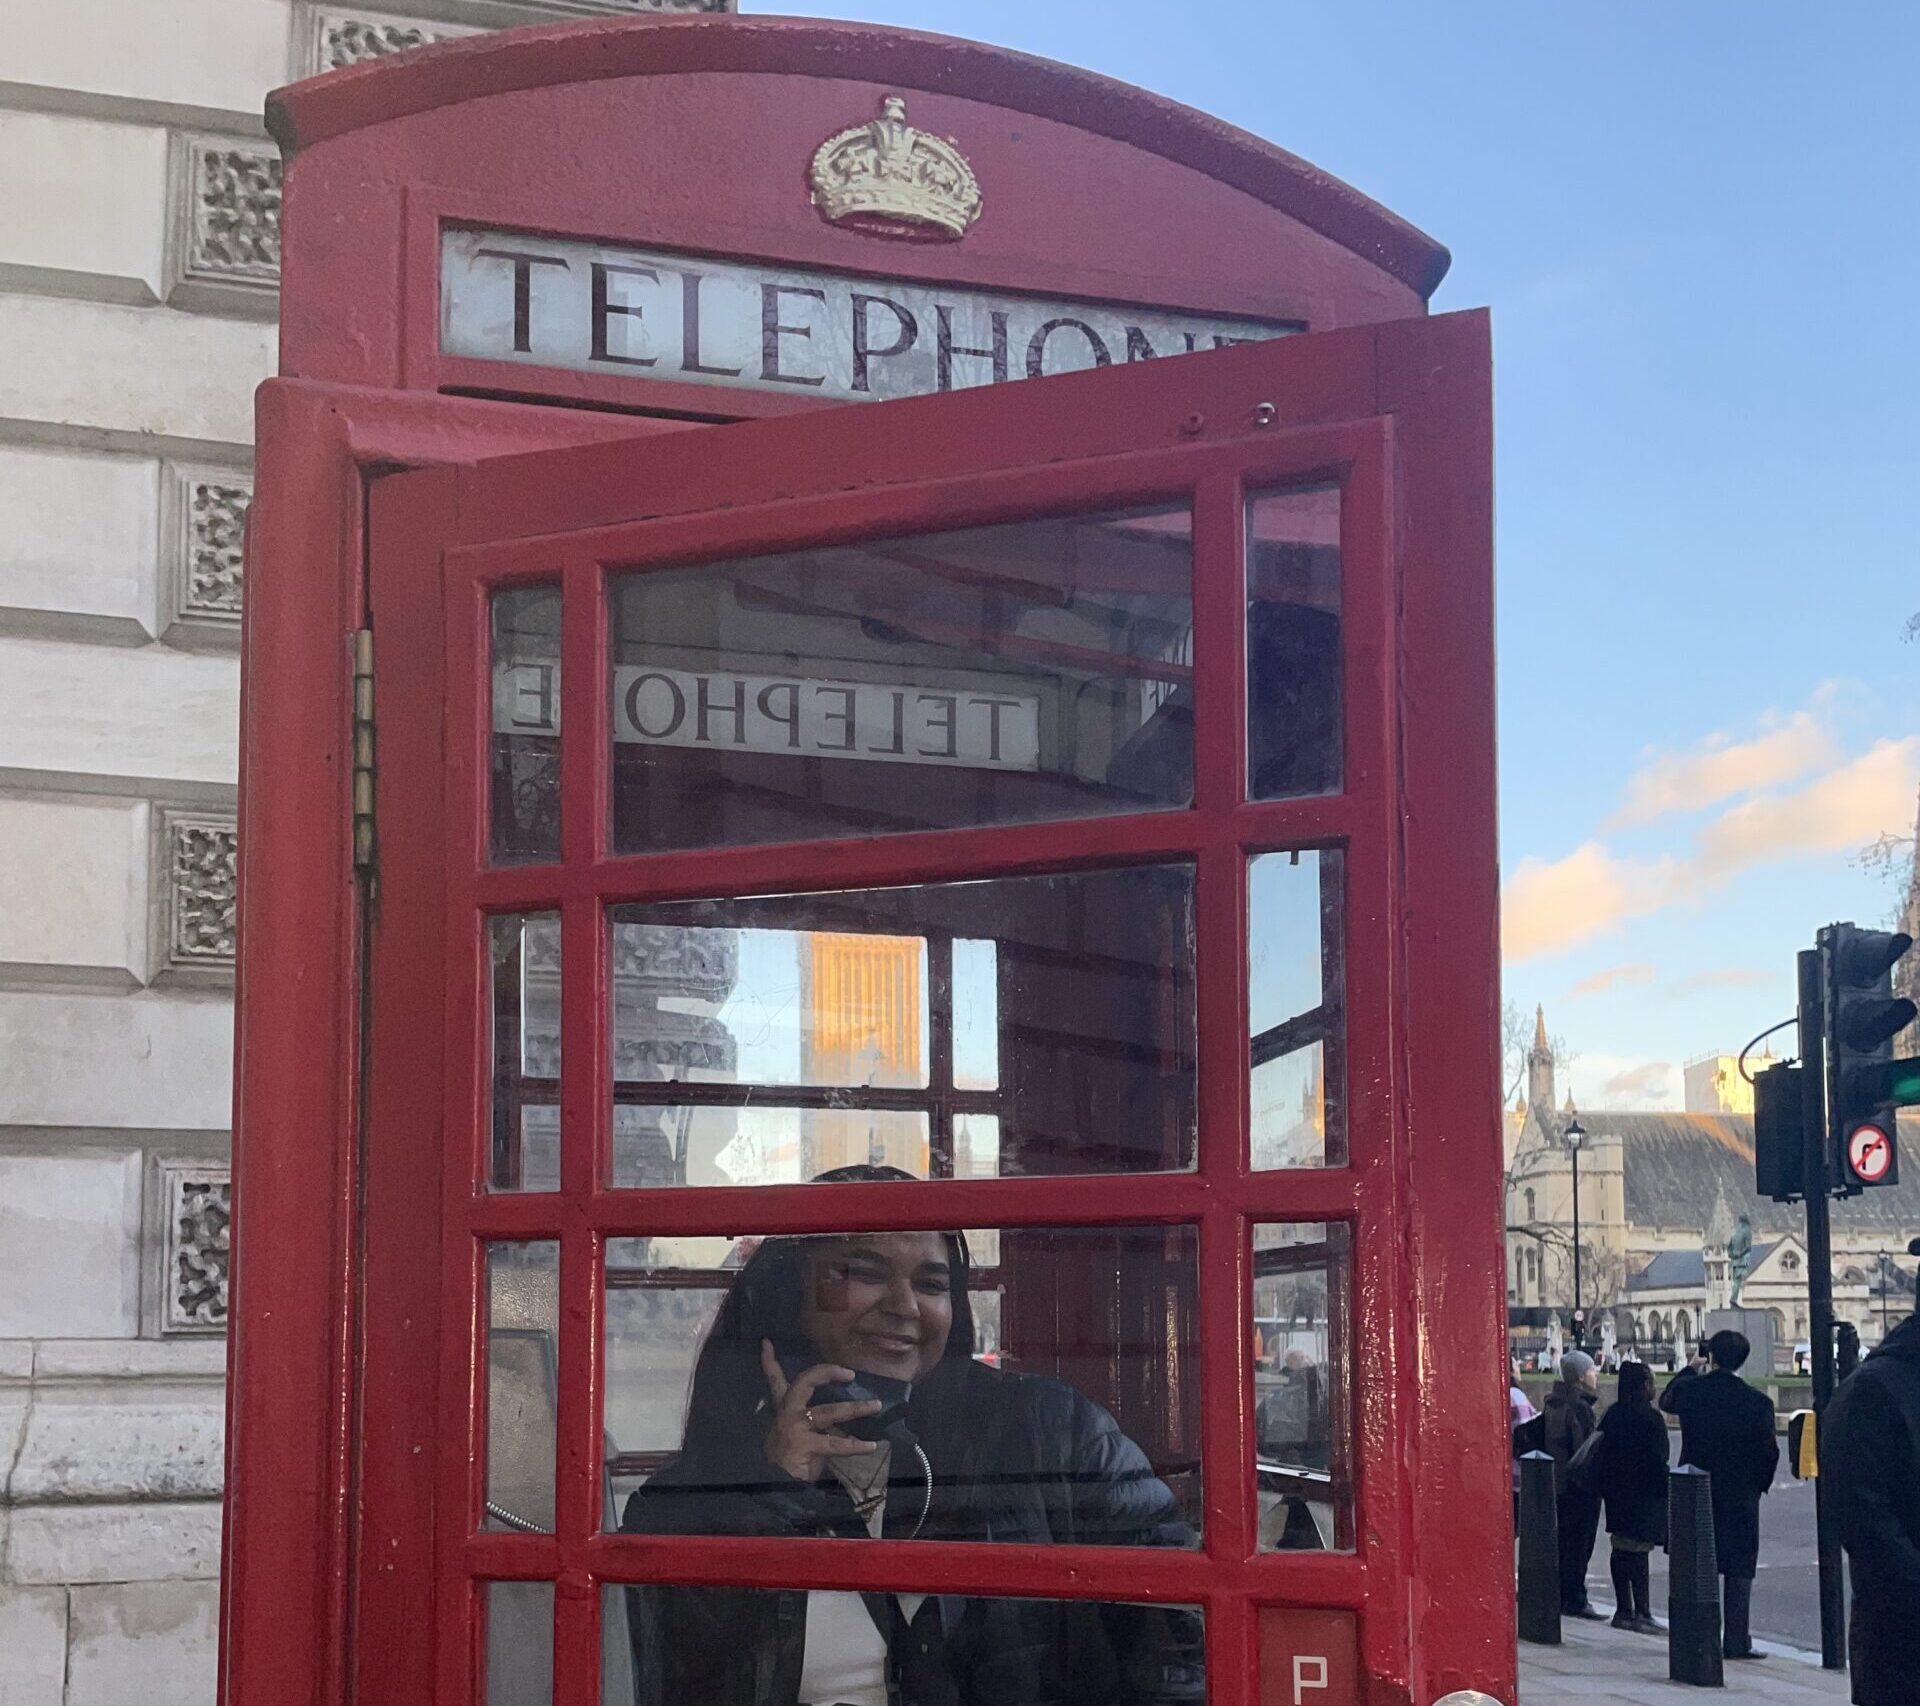 Me in a telephone booth